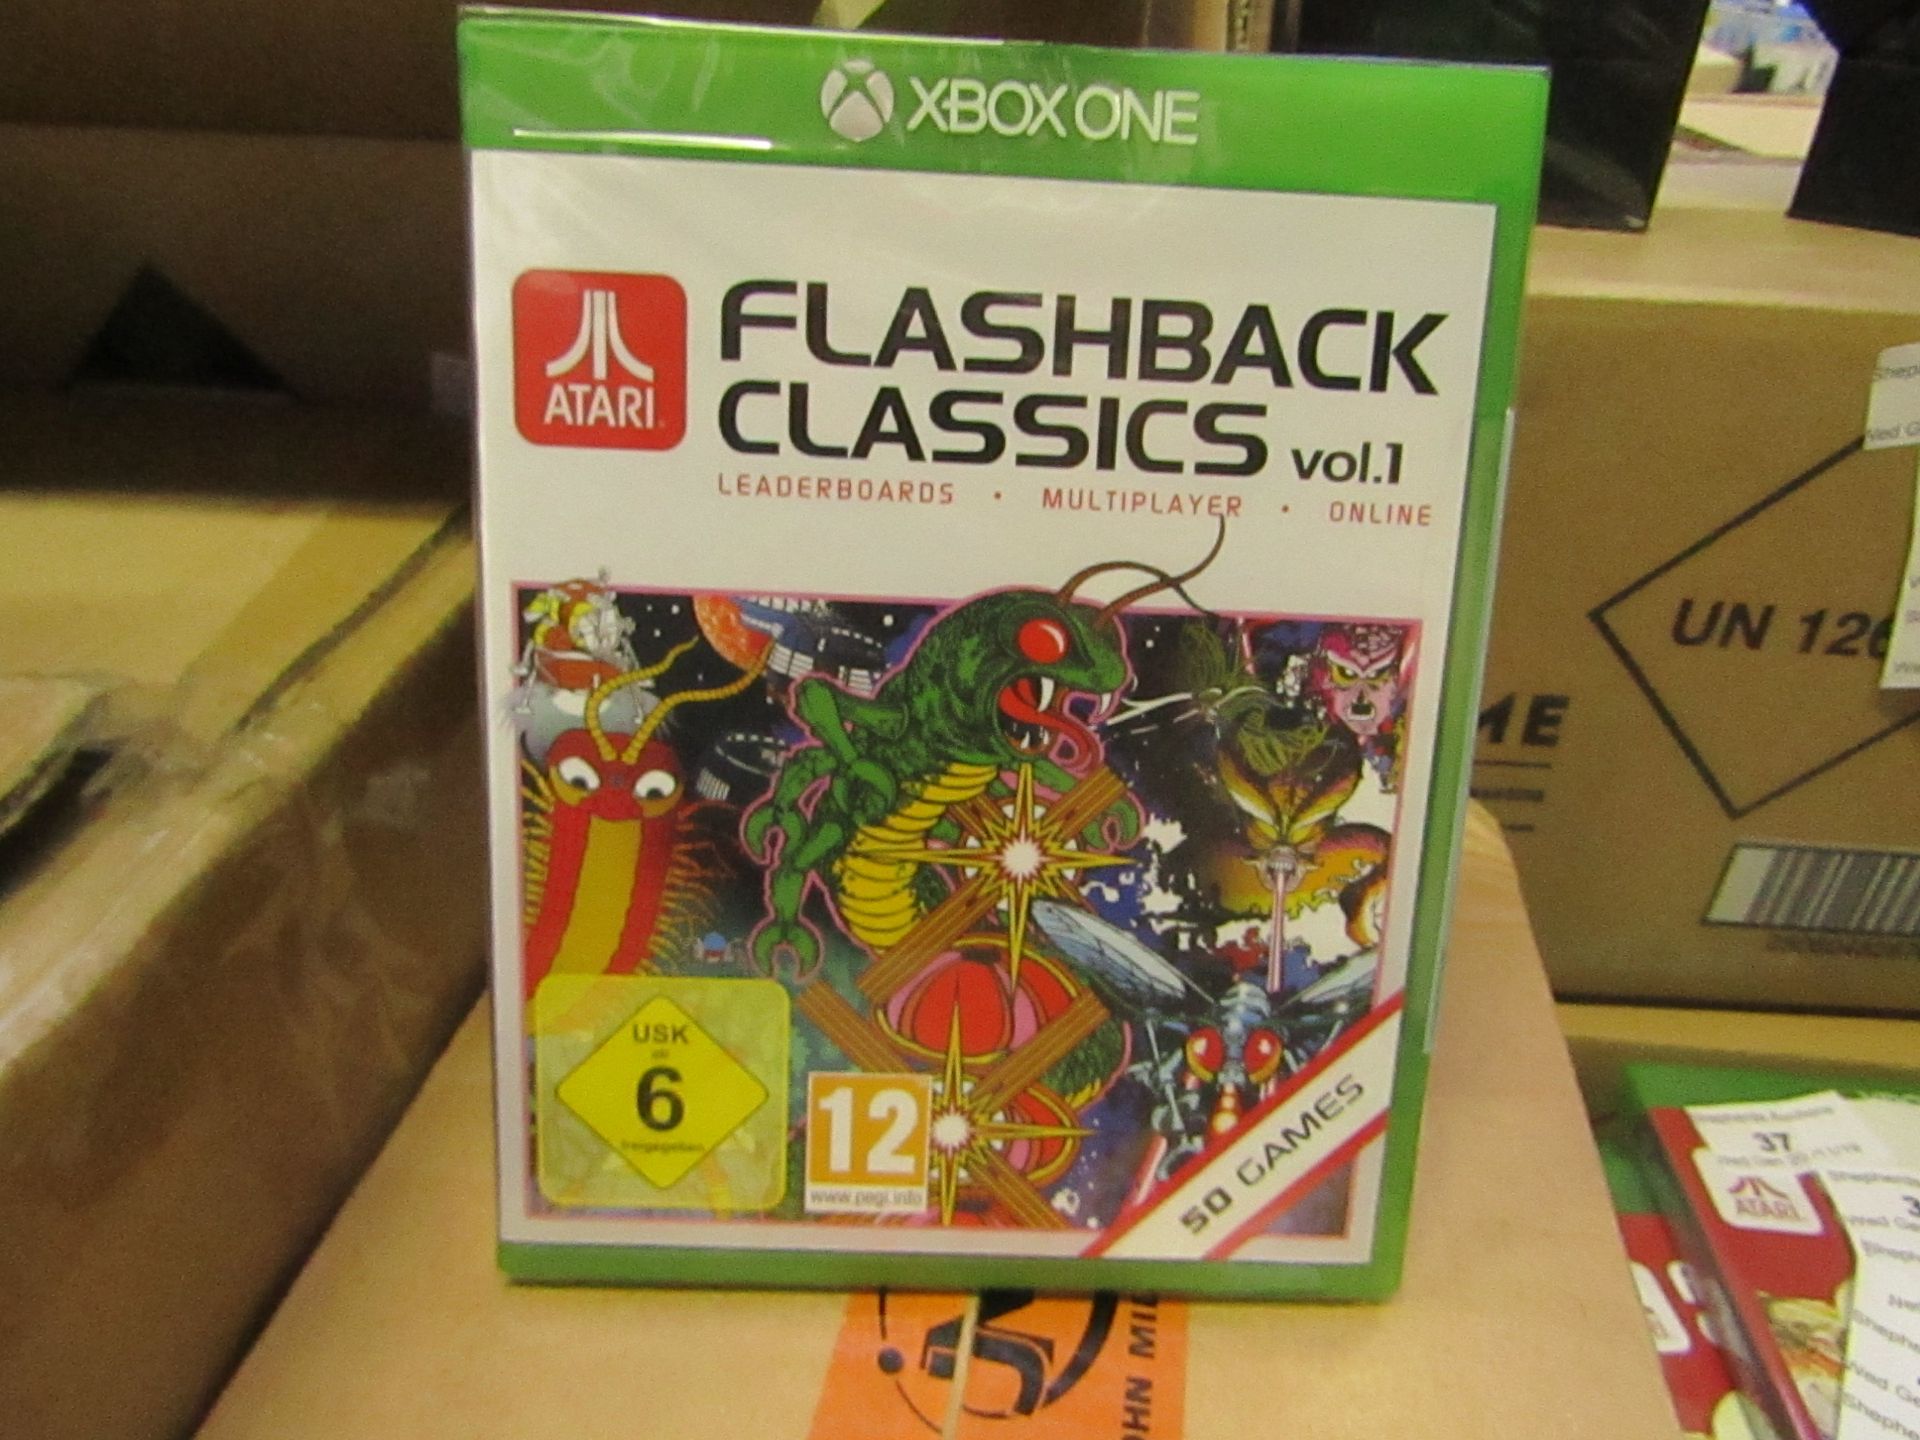 Atari Flash Back Classics Volume 1 for Xbox One, new and still sealed